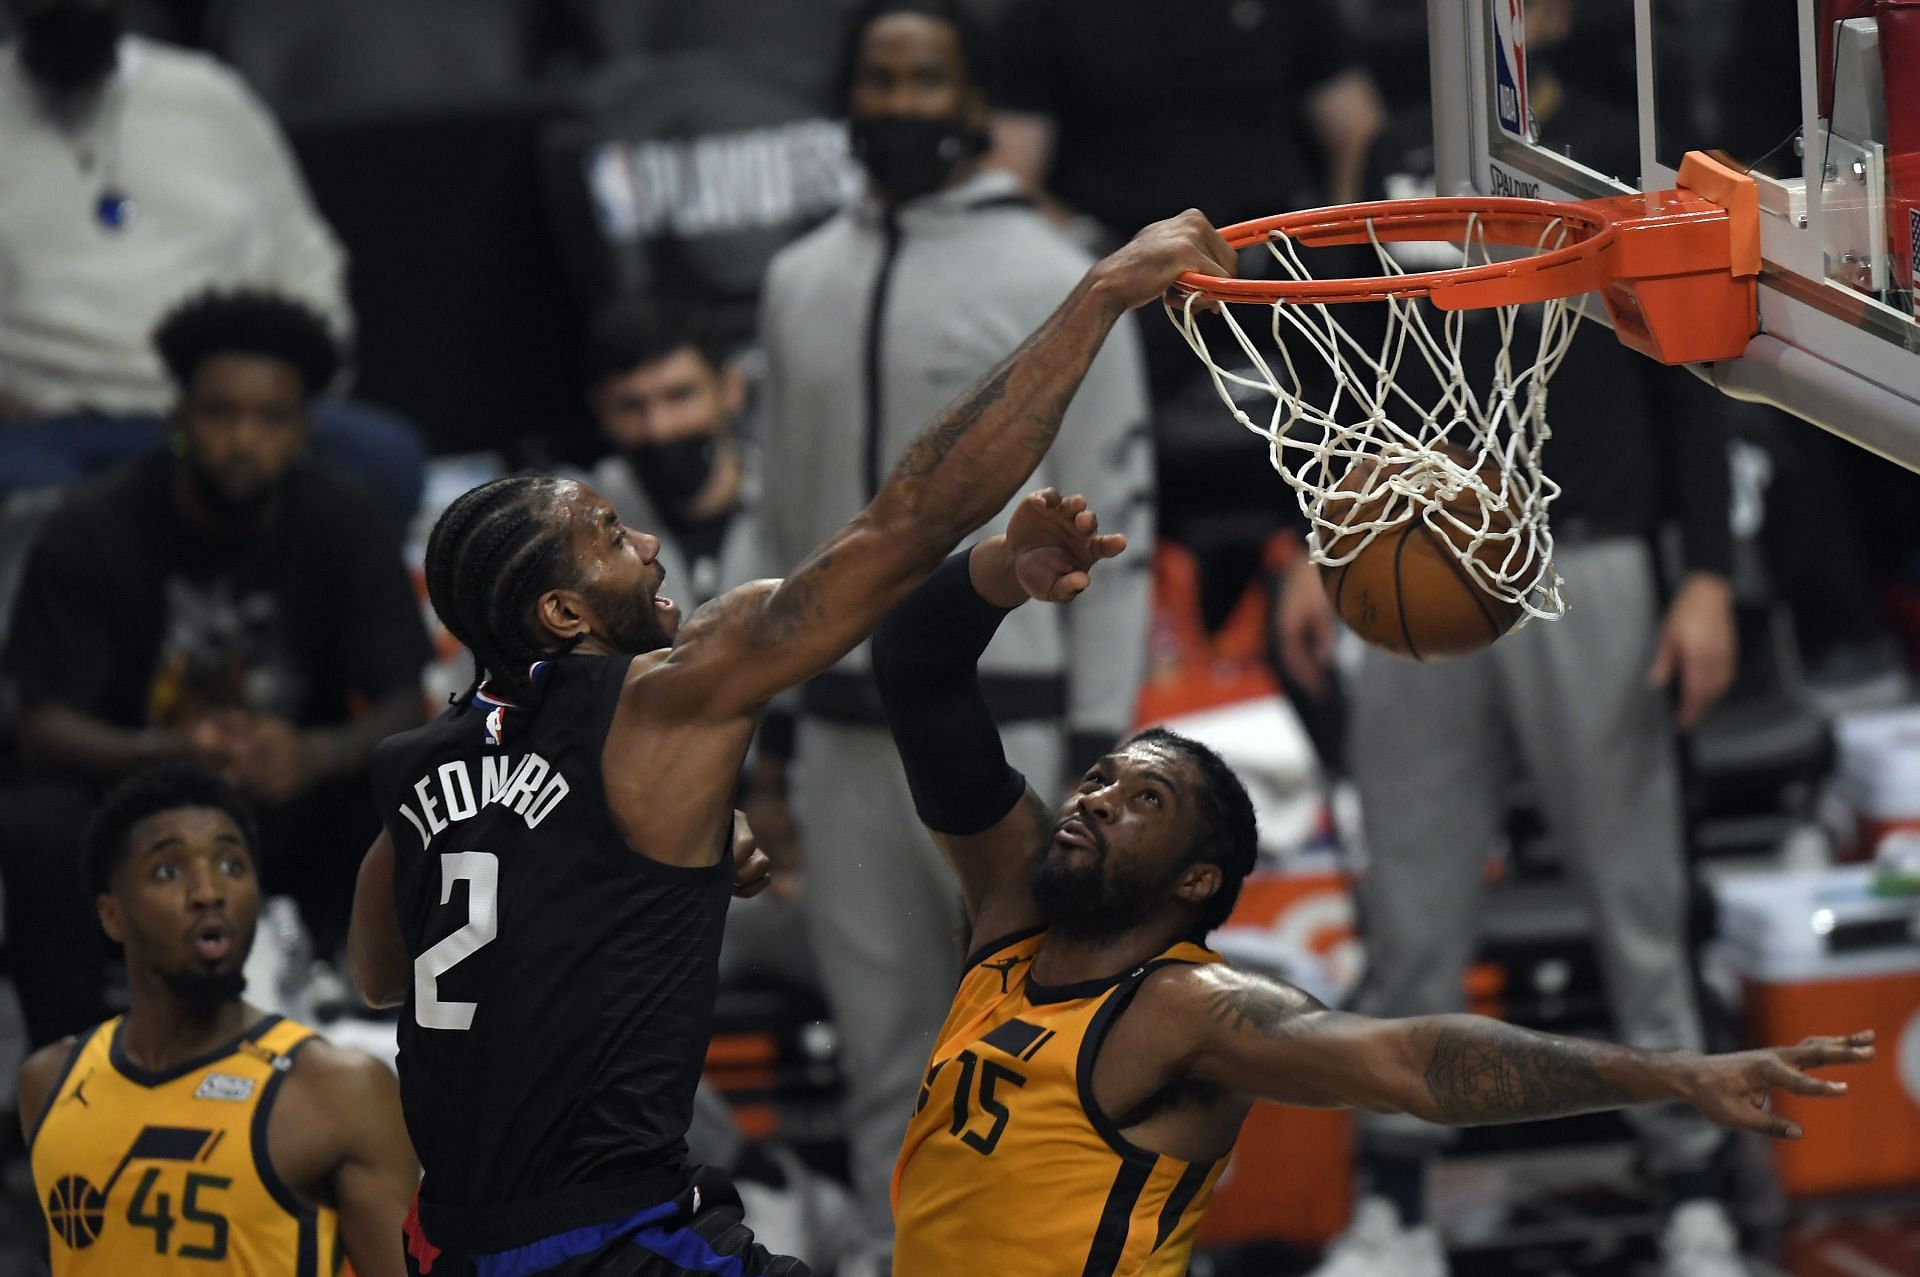 Kawhi Leonard #2 of the Los Angeles Clippers slam dunks against Derrick Favors #15 of the Utah Jazz during the first half in Game Four of the Western Conference second-round playoff series at Staples Center on June 14, 2021 in Los Angeles, California.